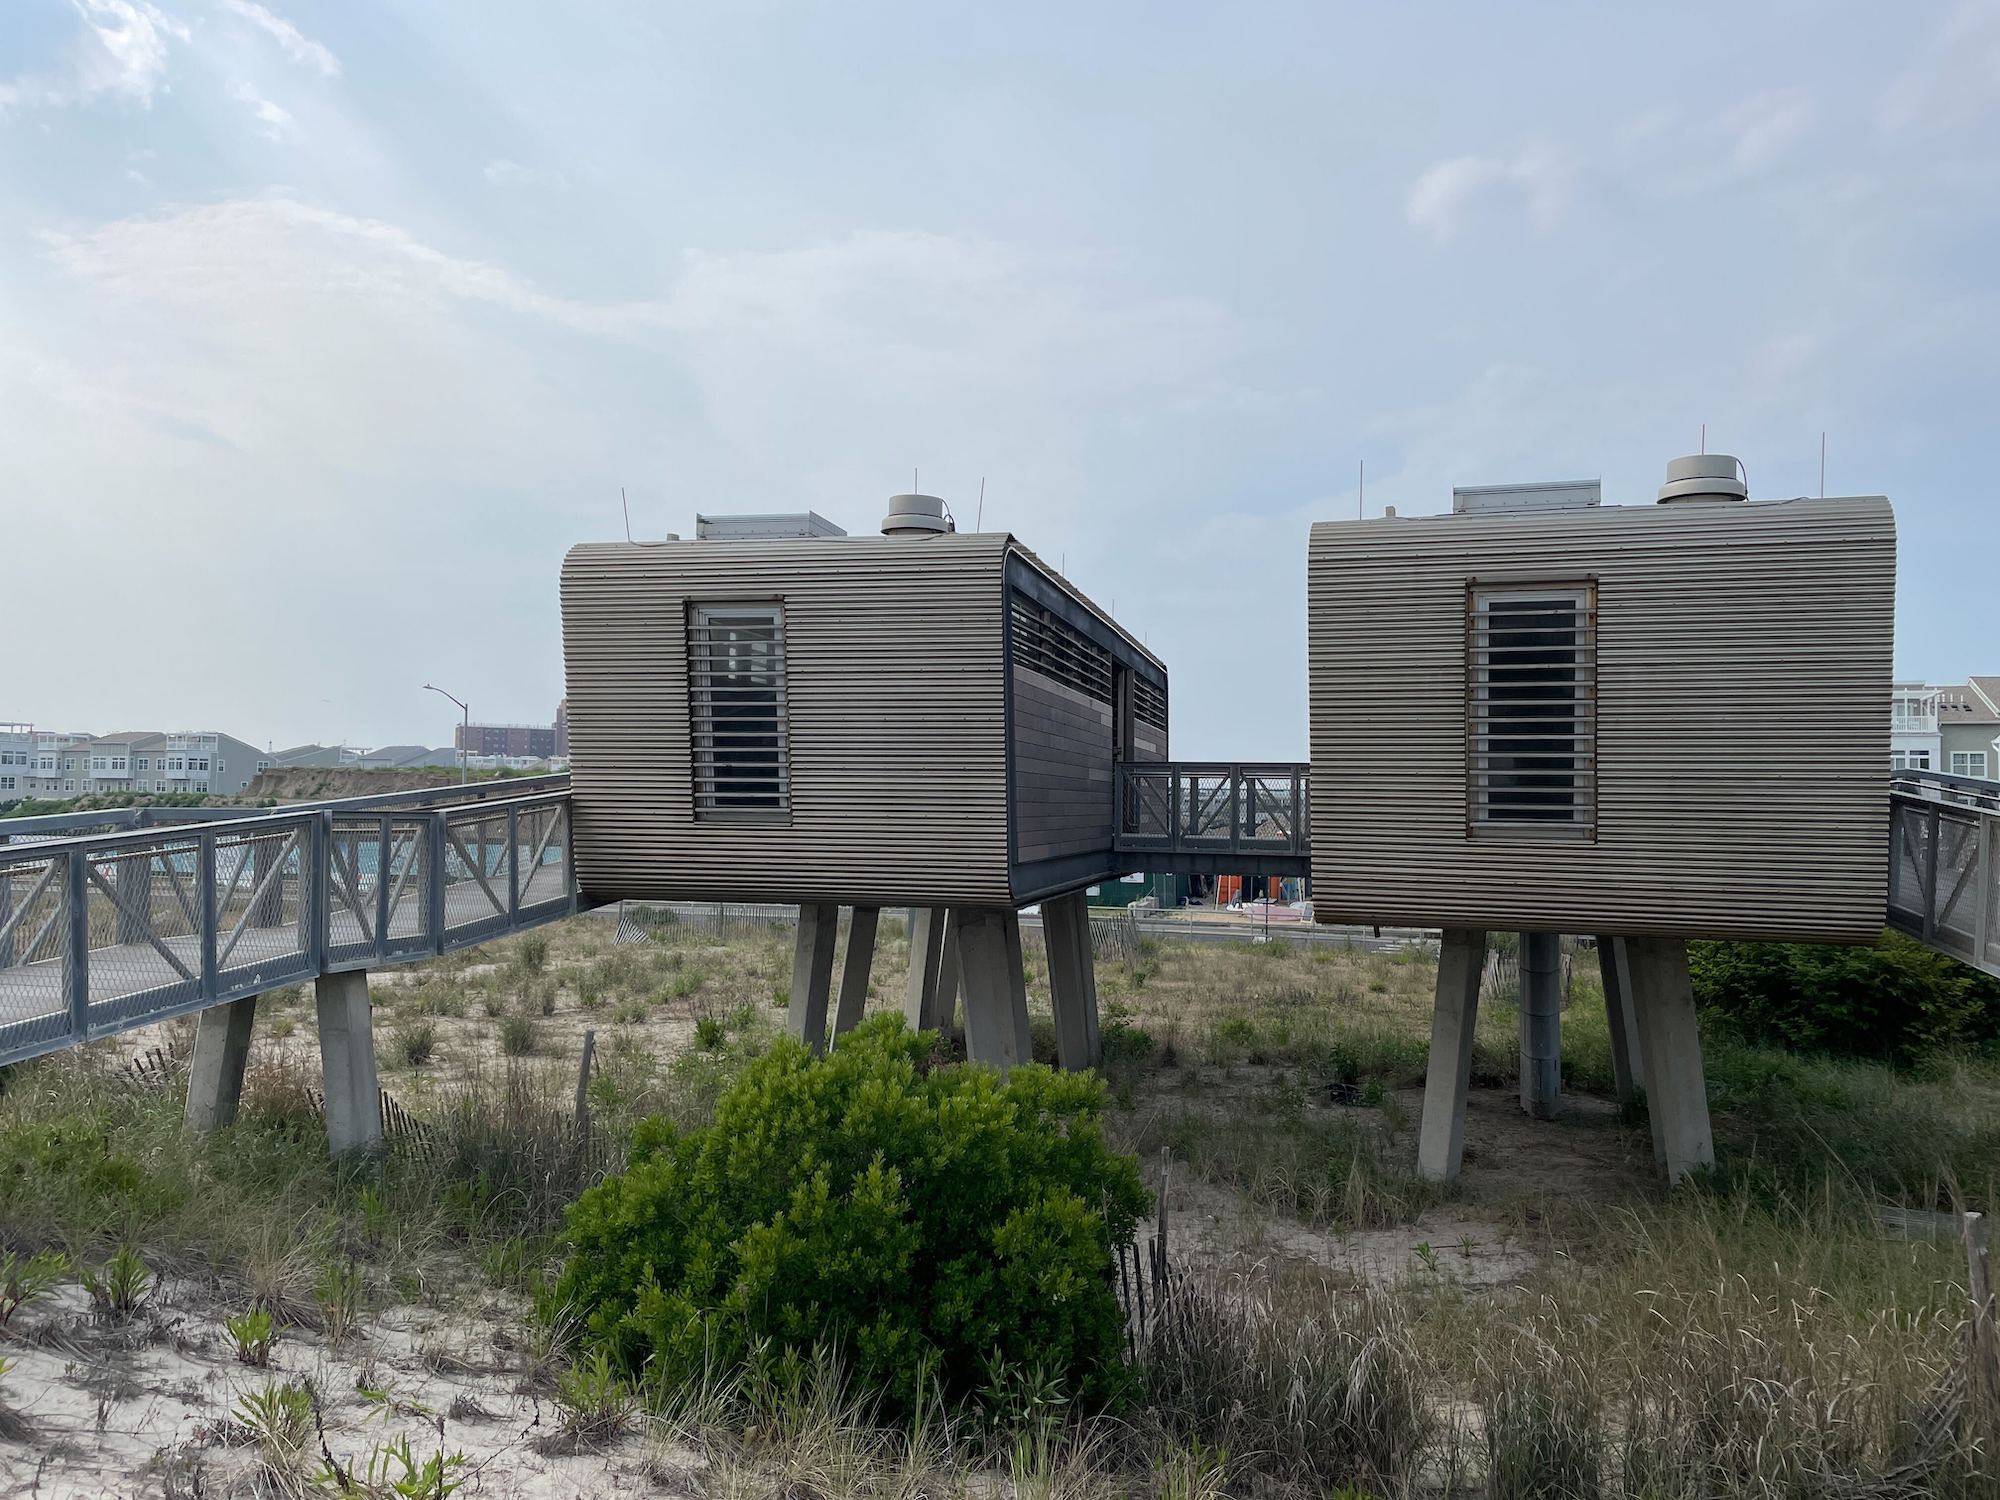 Modular restrooms rise above the sand dunes in the Rockaways.